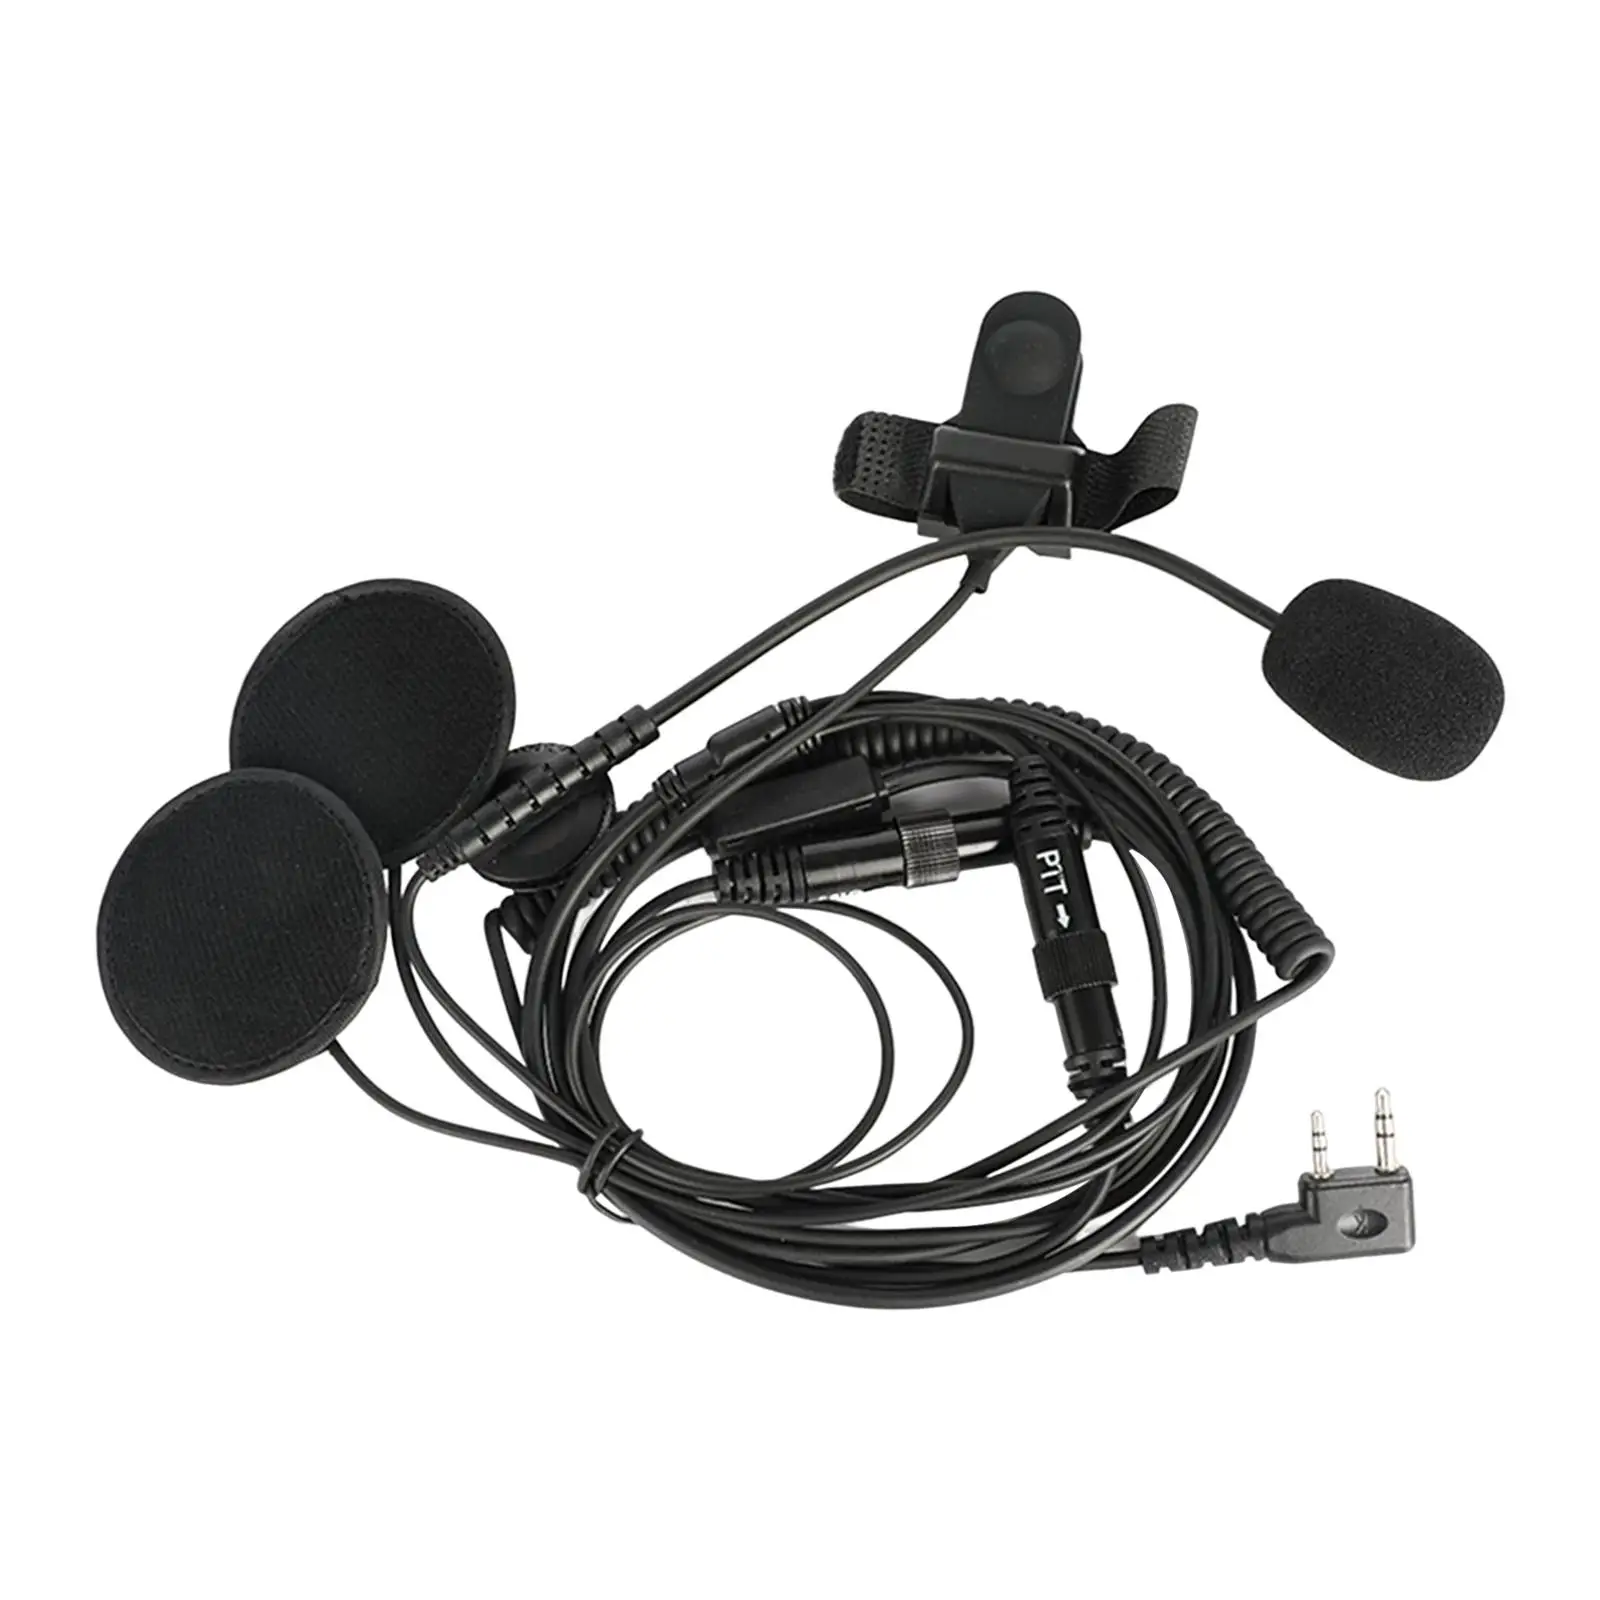 Two Way Radio Walkie Talkie Headset Earpiece with PMic Motorcycle Cap Headset for Riding Motorbike